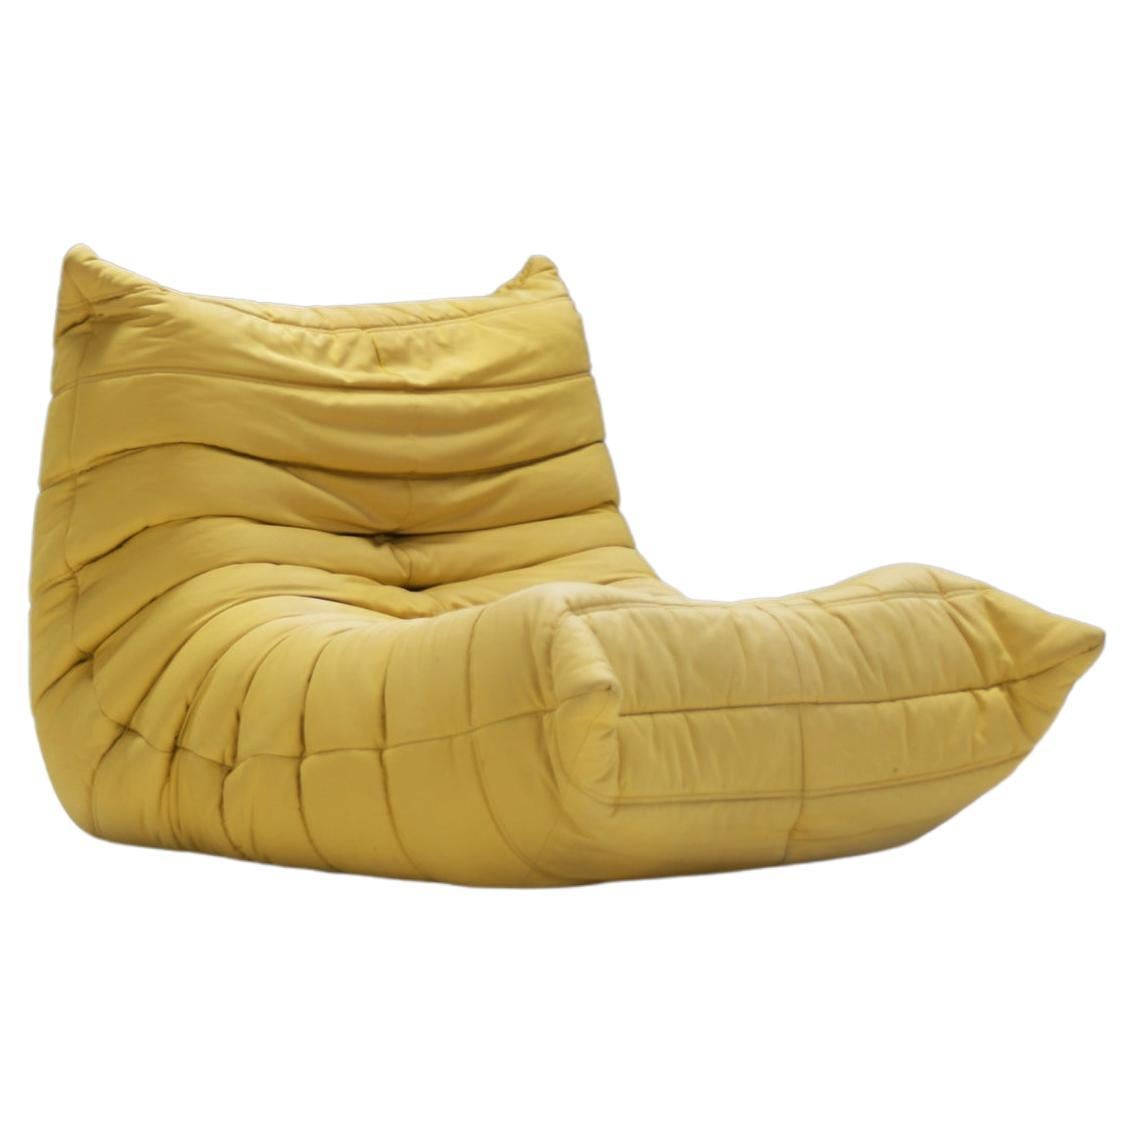 Togo fireside in original yellow fabric  by Michel Ducaroy for Ligne Roset For Sale